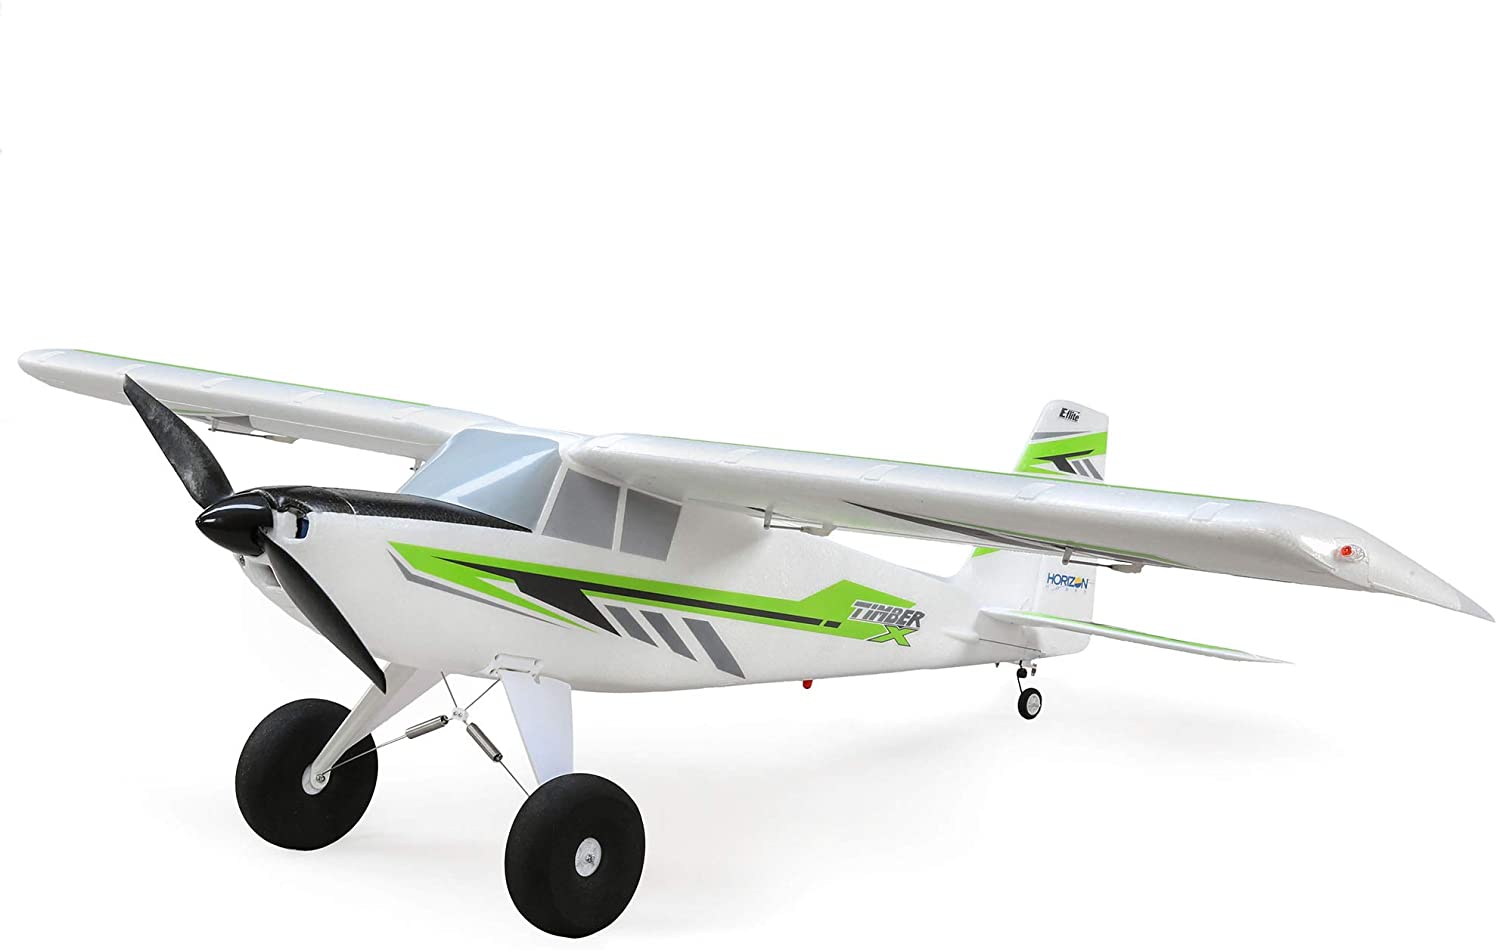 E-flite RC Airplane Timber X 1.2m PNP (Transmitter, Receiver, Battery and Charger not Included), EFL3875